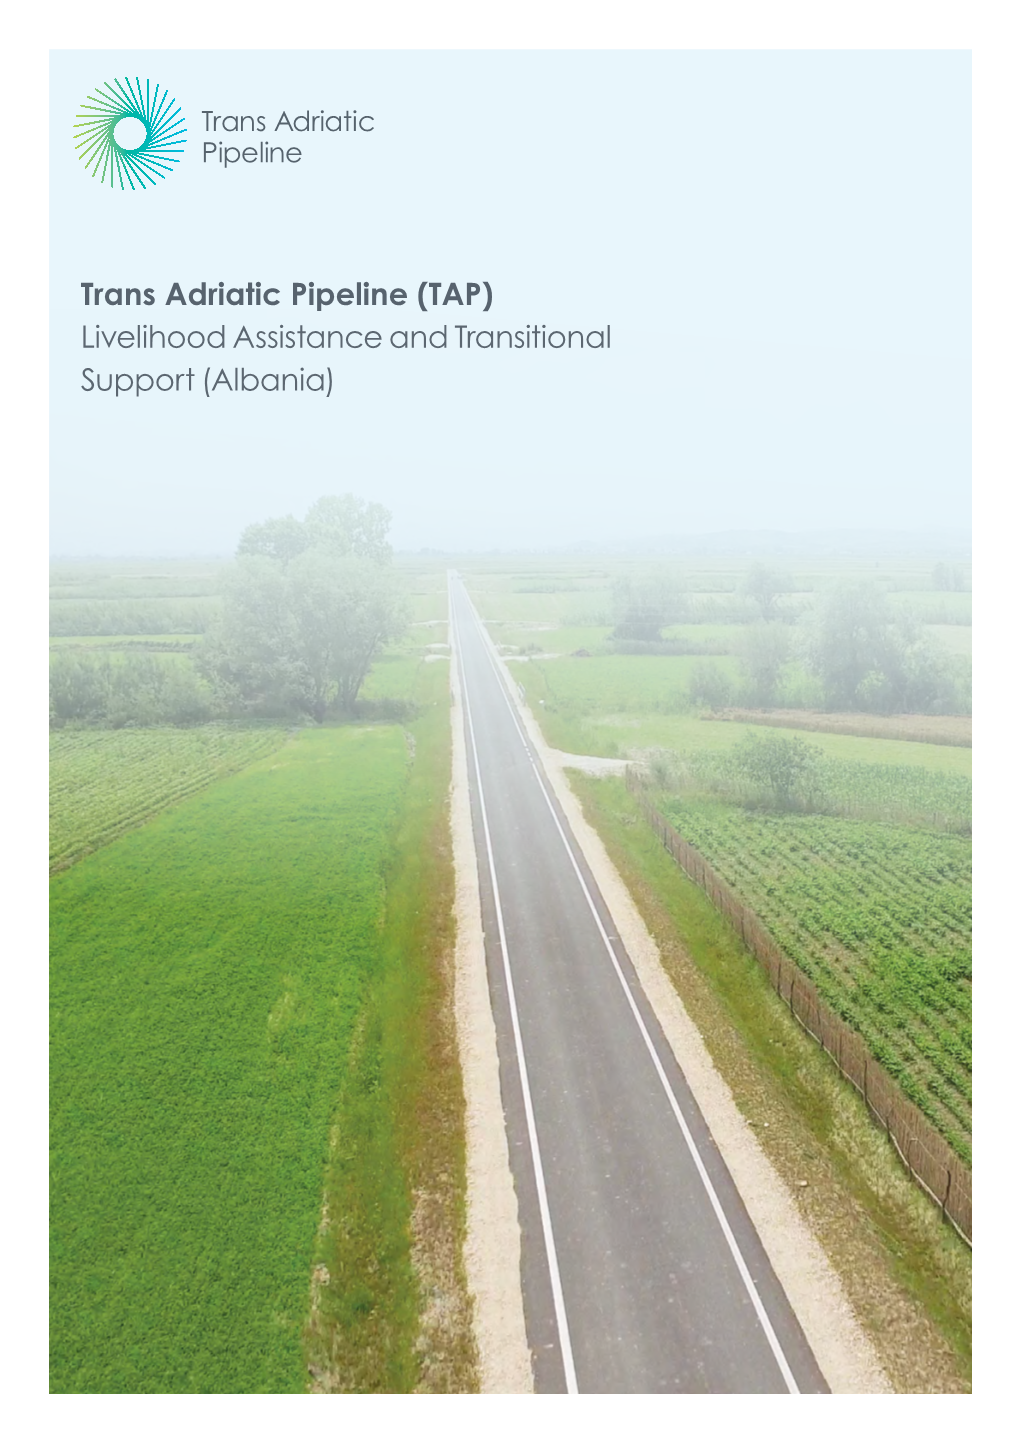 Trans Adriatic Pipeline (TAP) Livelihood Assistance and Transitional Support (Albania) Table of Contents